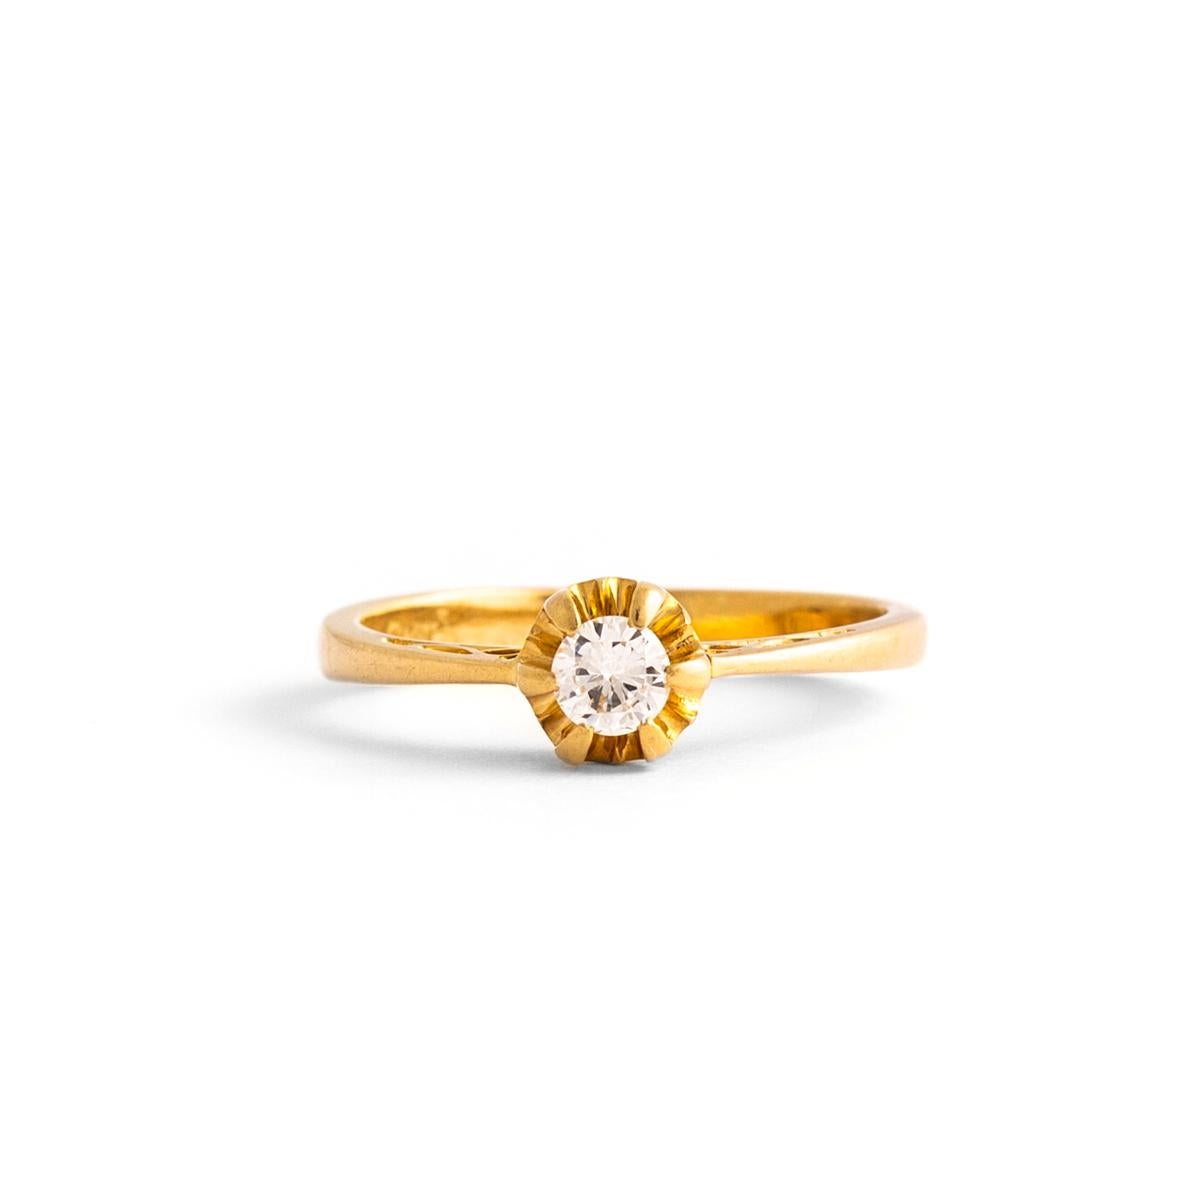 Solitaire round cut Diamond on yellow gold Ring.
Diamond estimated weight: 0.12 carat.
Modern cut. Estimated to be G-H color and Vvs clarity.
Diamond diameter: approximately 3.21 millimeters.
Ring Size: 5 1/4.
Gross weight: 2.84 grams.